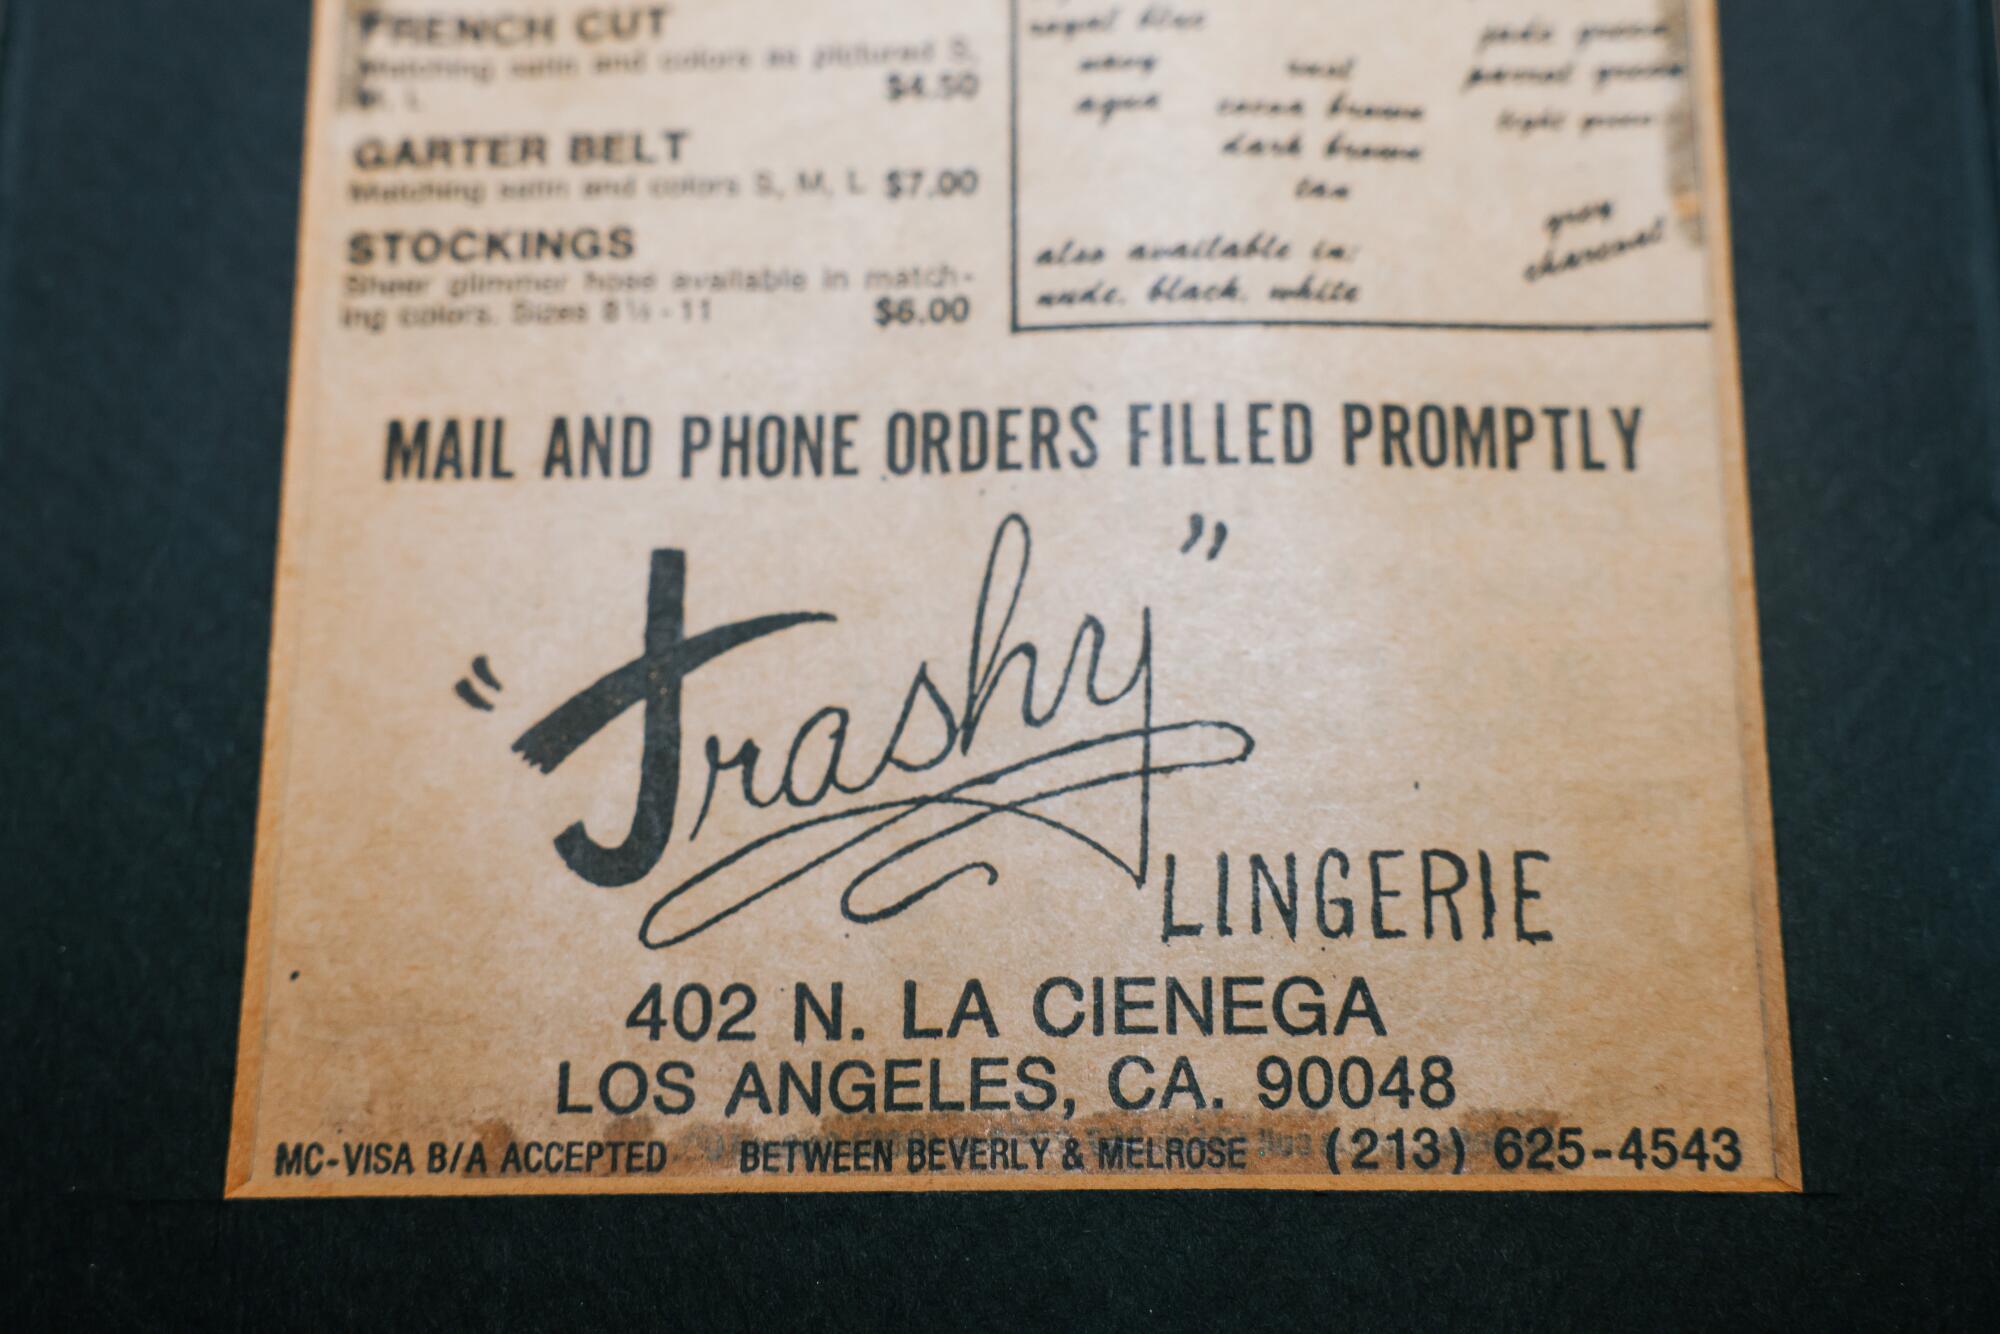 A vintage newspaper clipping shows an advertisement for Trashy Lingerie.